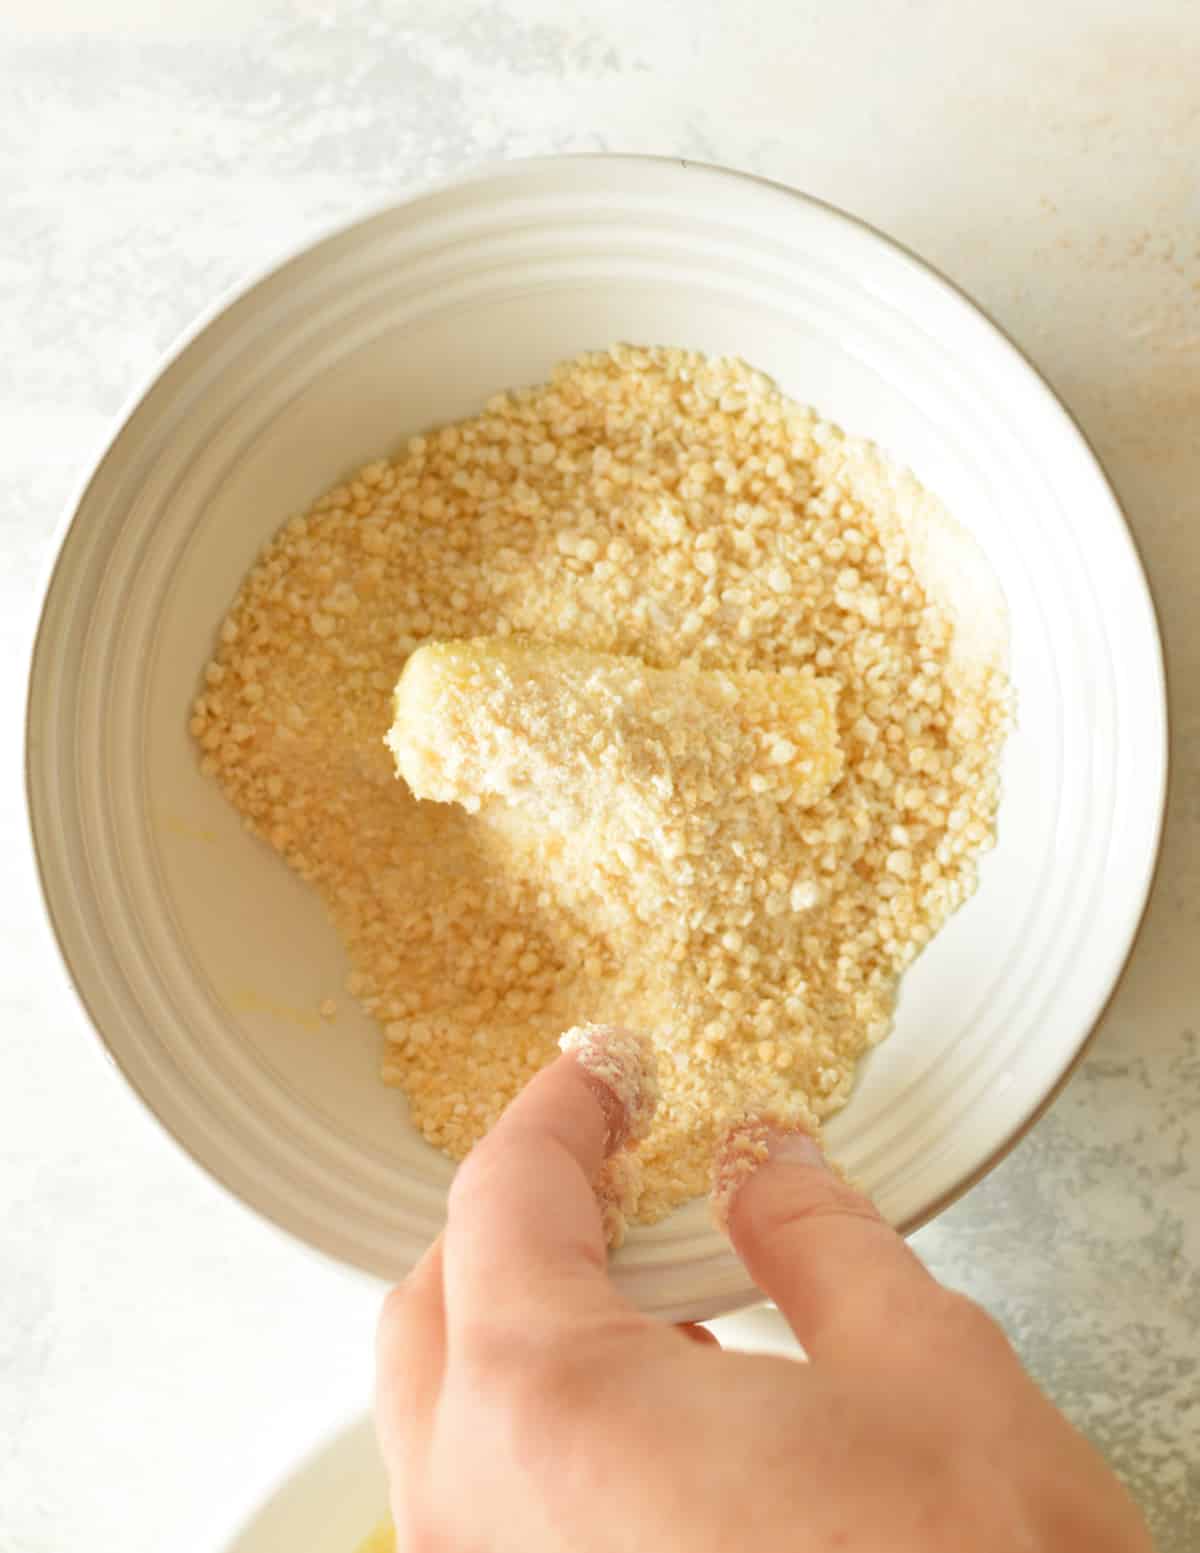 a cheese stick in a bowl of gluten free breadcrumbs